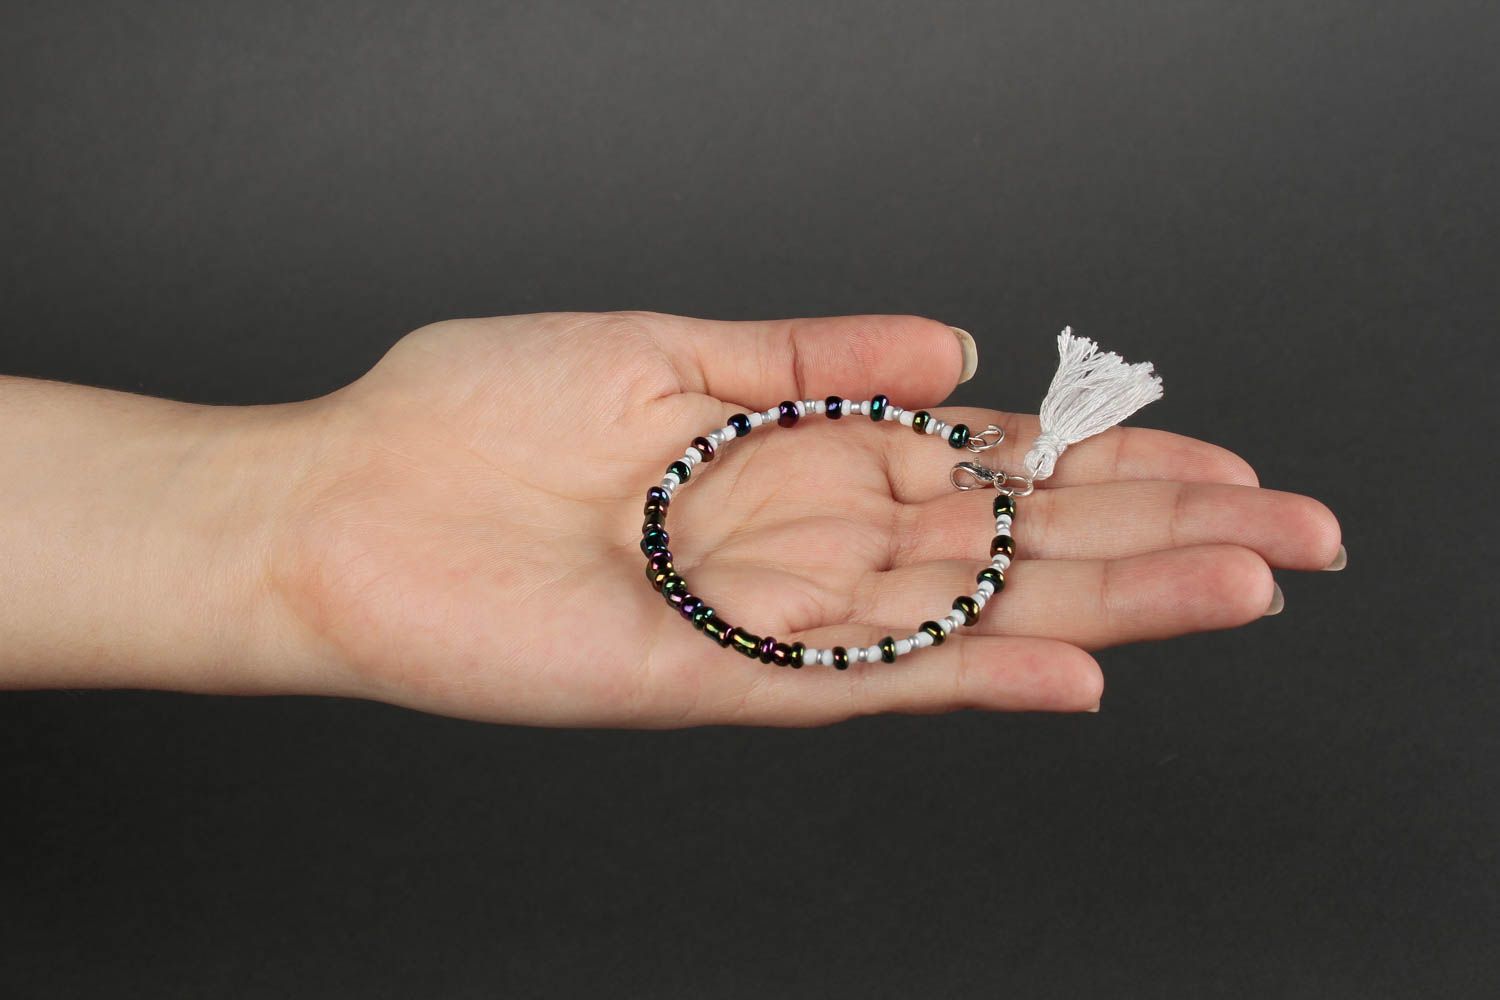 Handmade small black and white beads adjustable bracelet for young girls photo 5